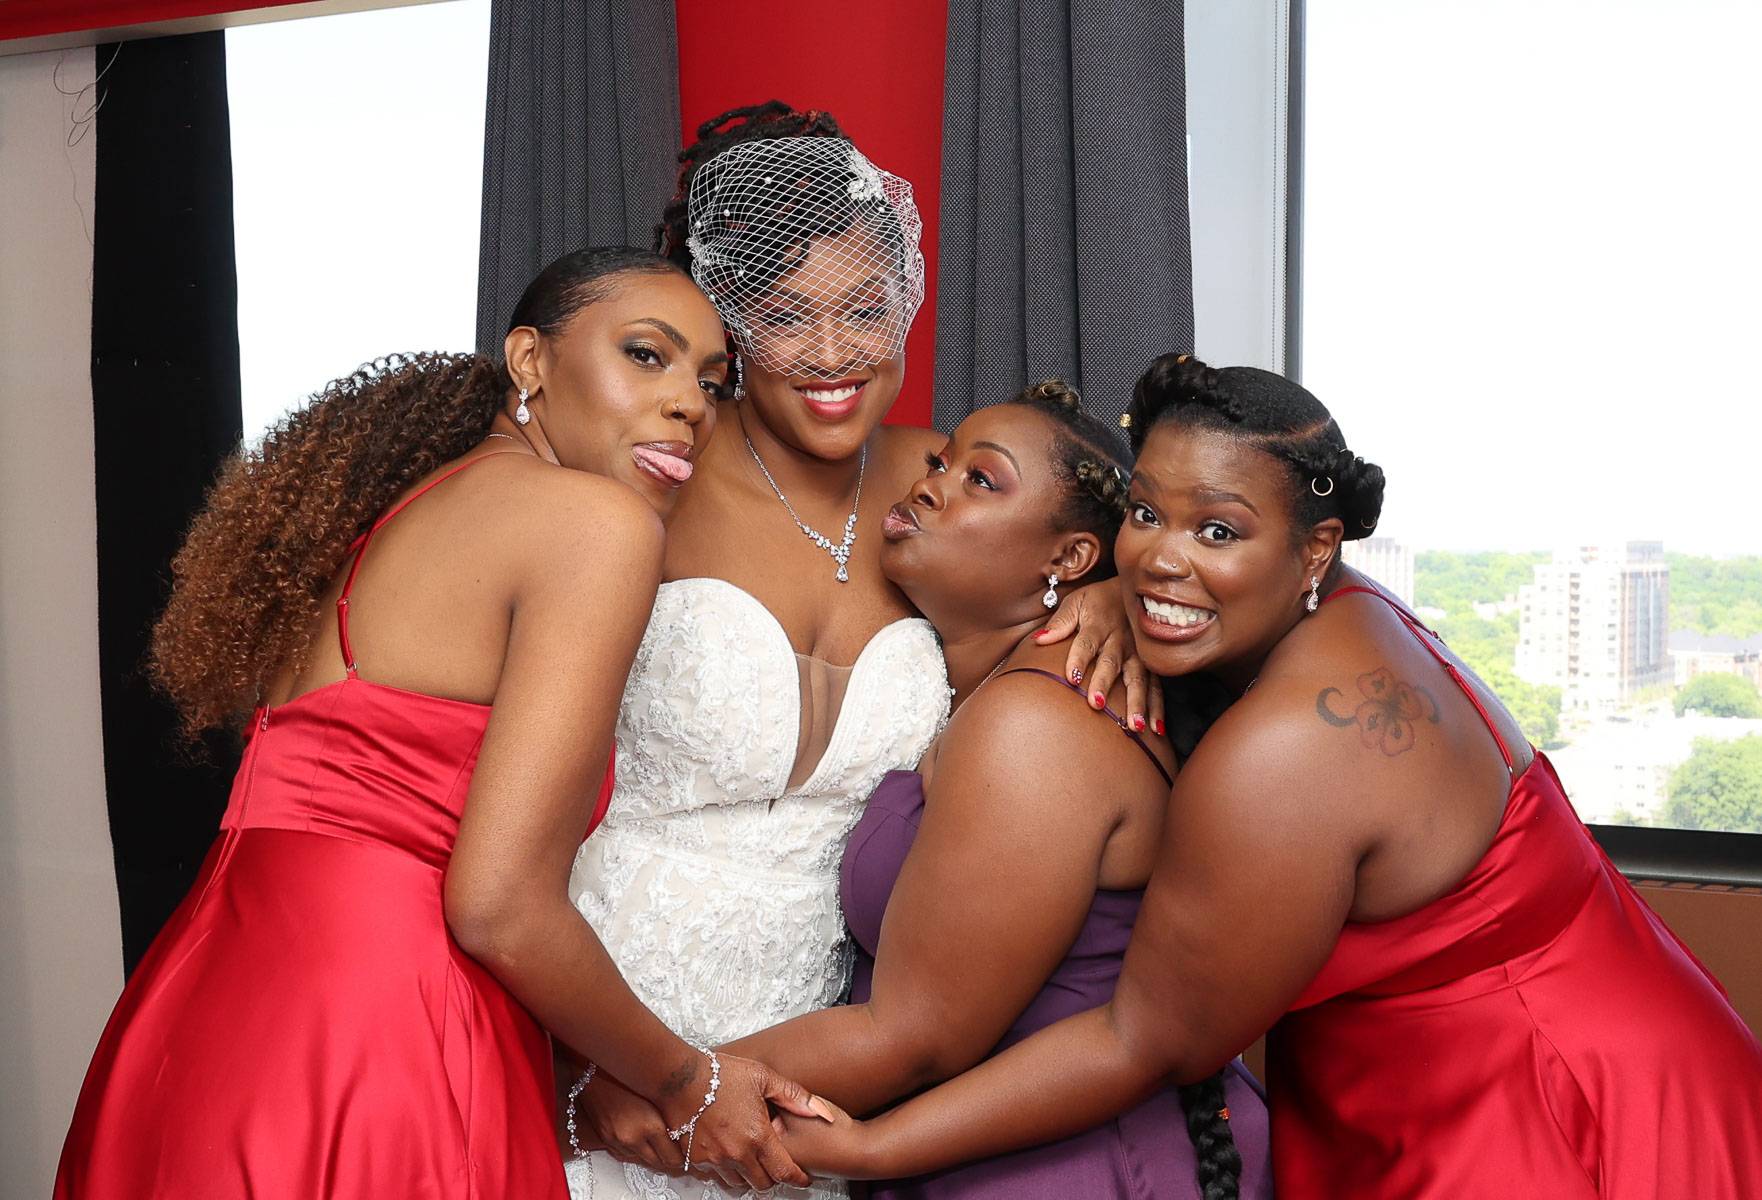 The bride and her three bridesmaids in a funny pose